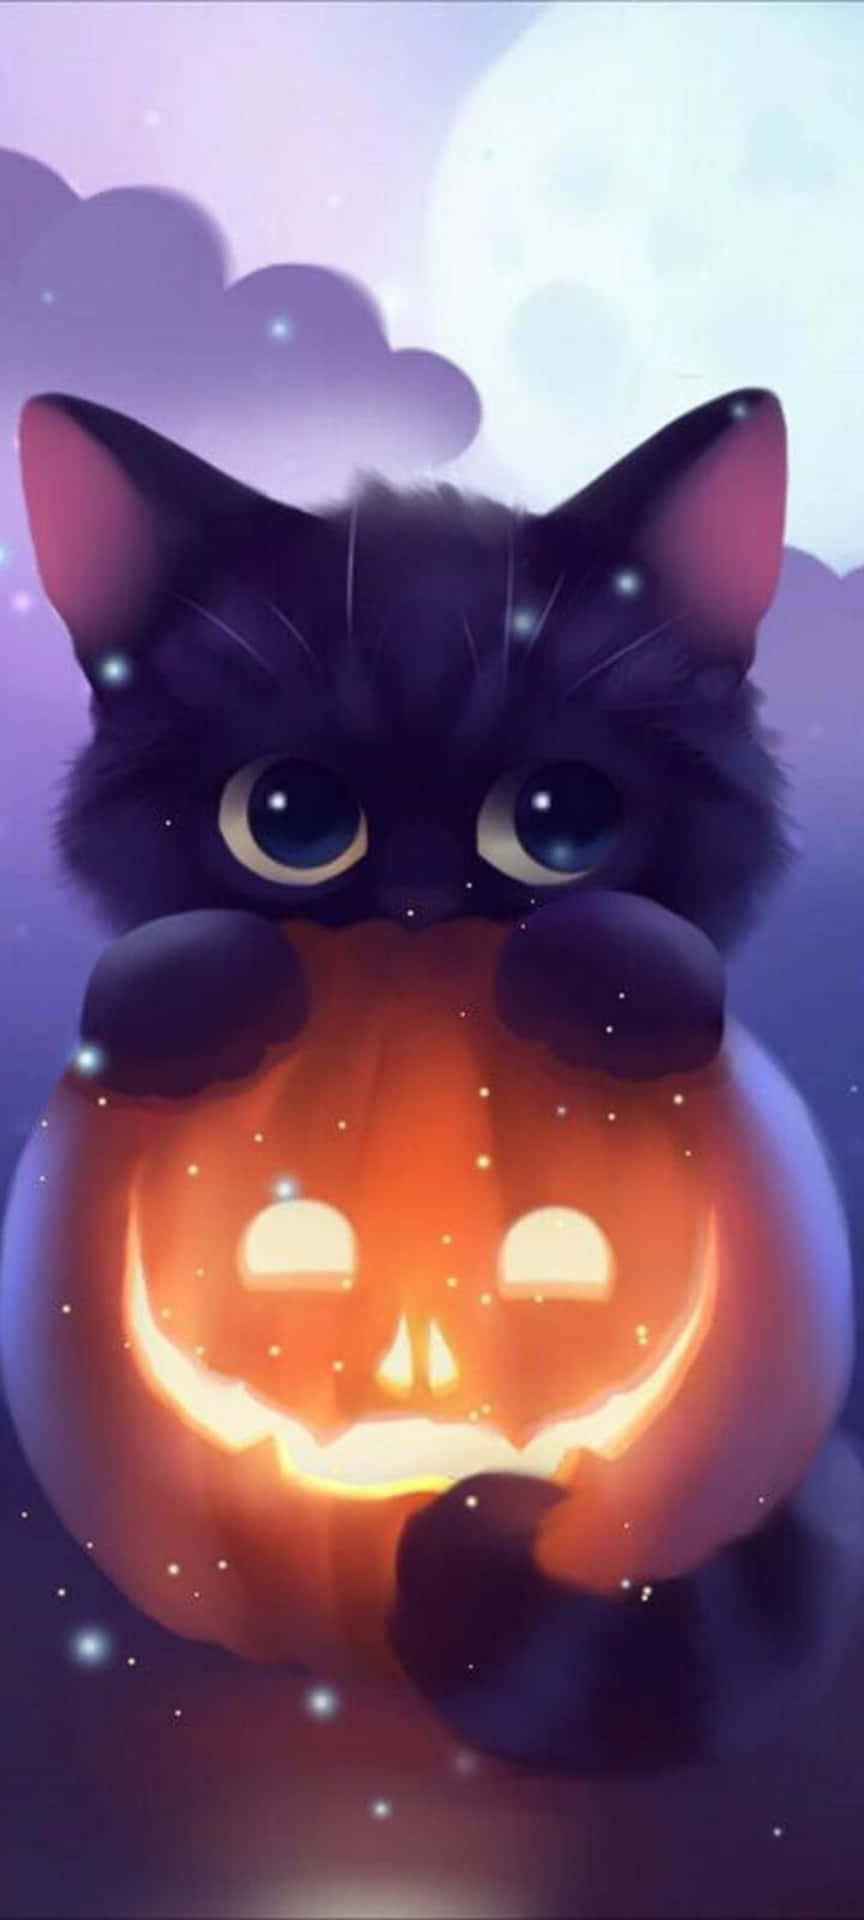 A Black Cat Is Holding A Pumpkin In Its Mouth